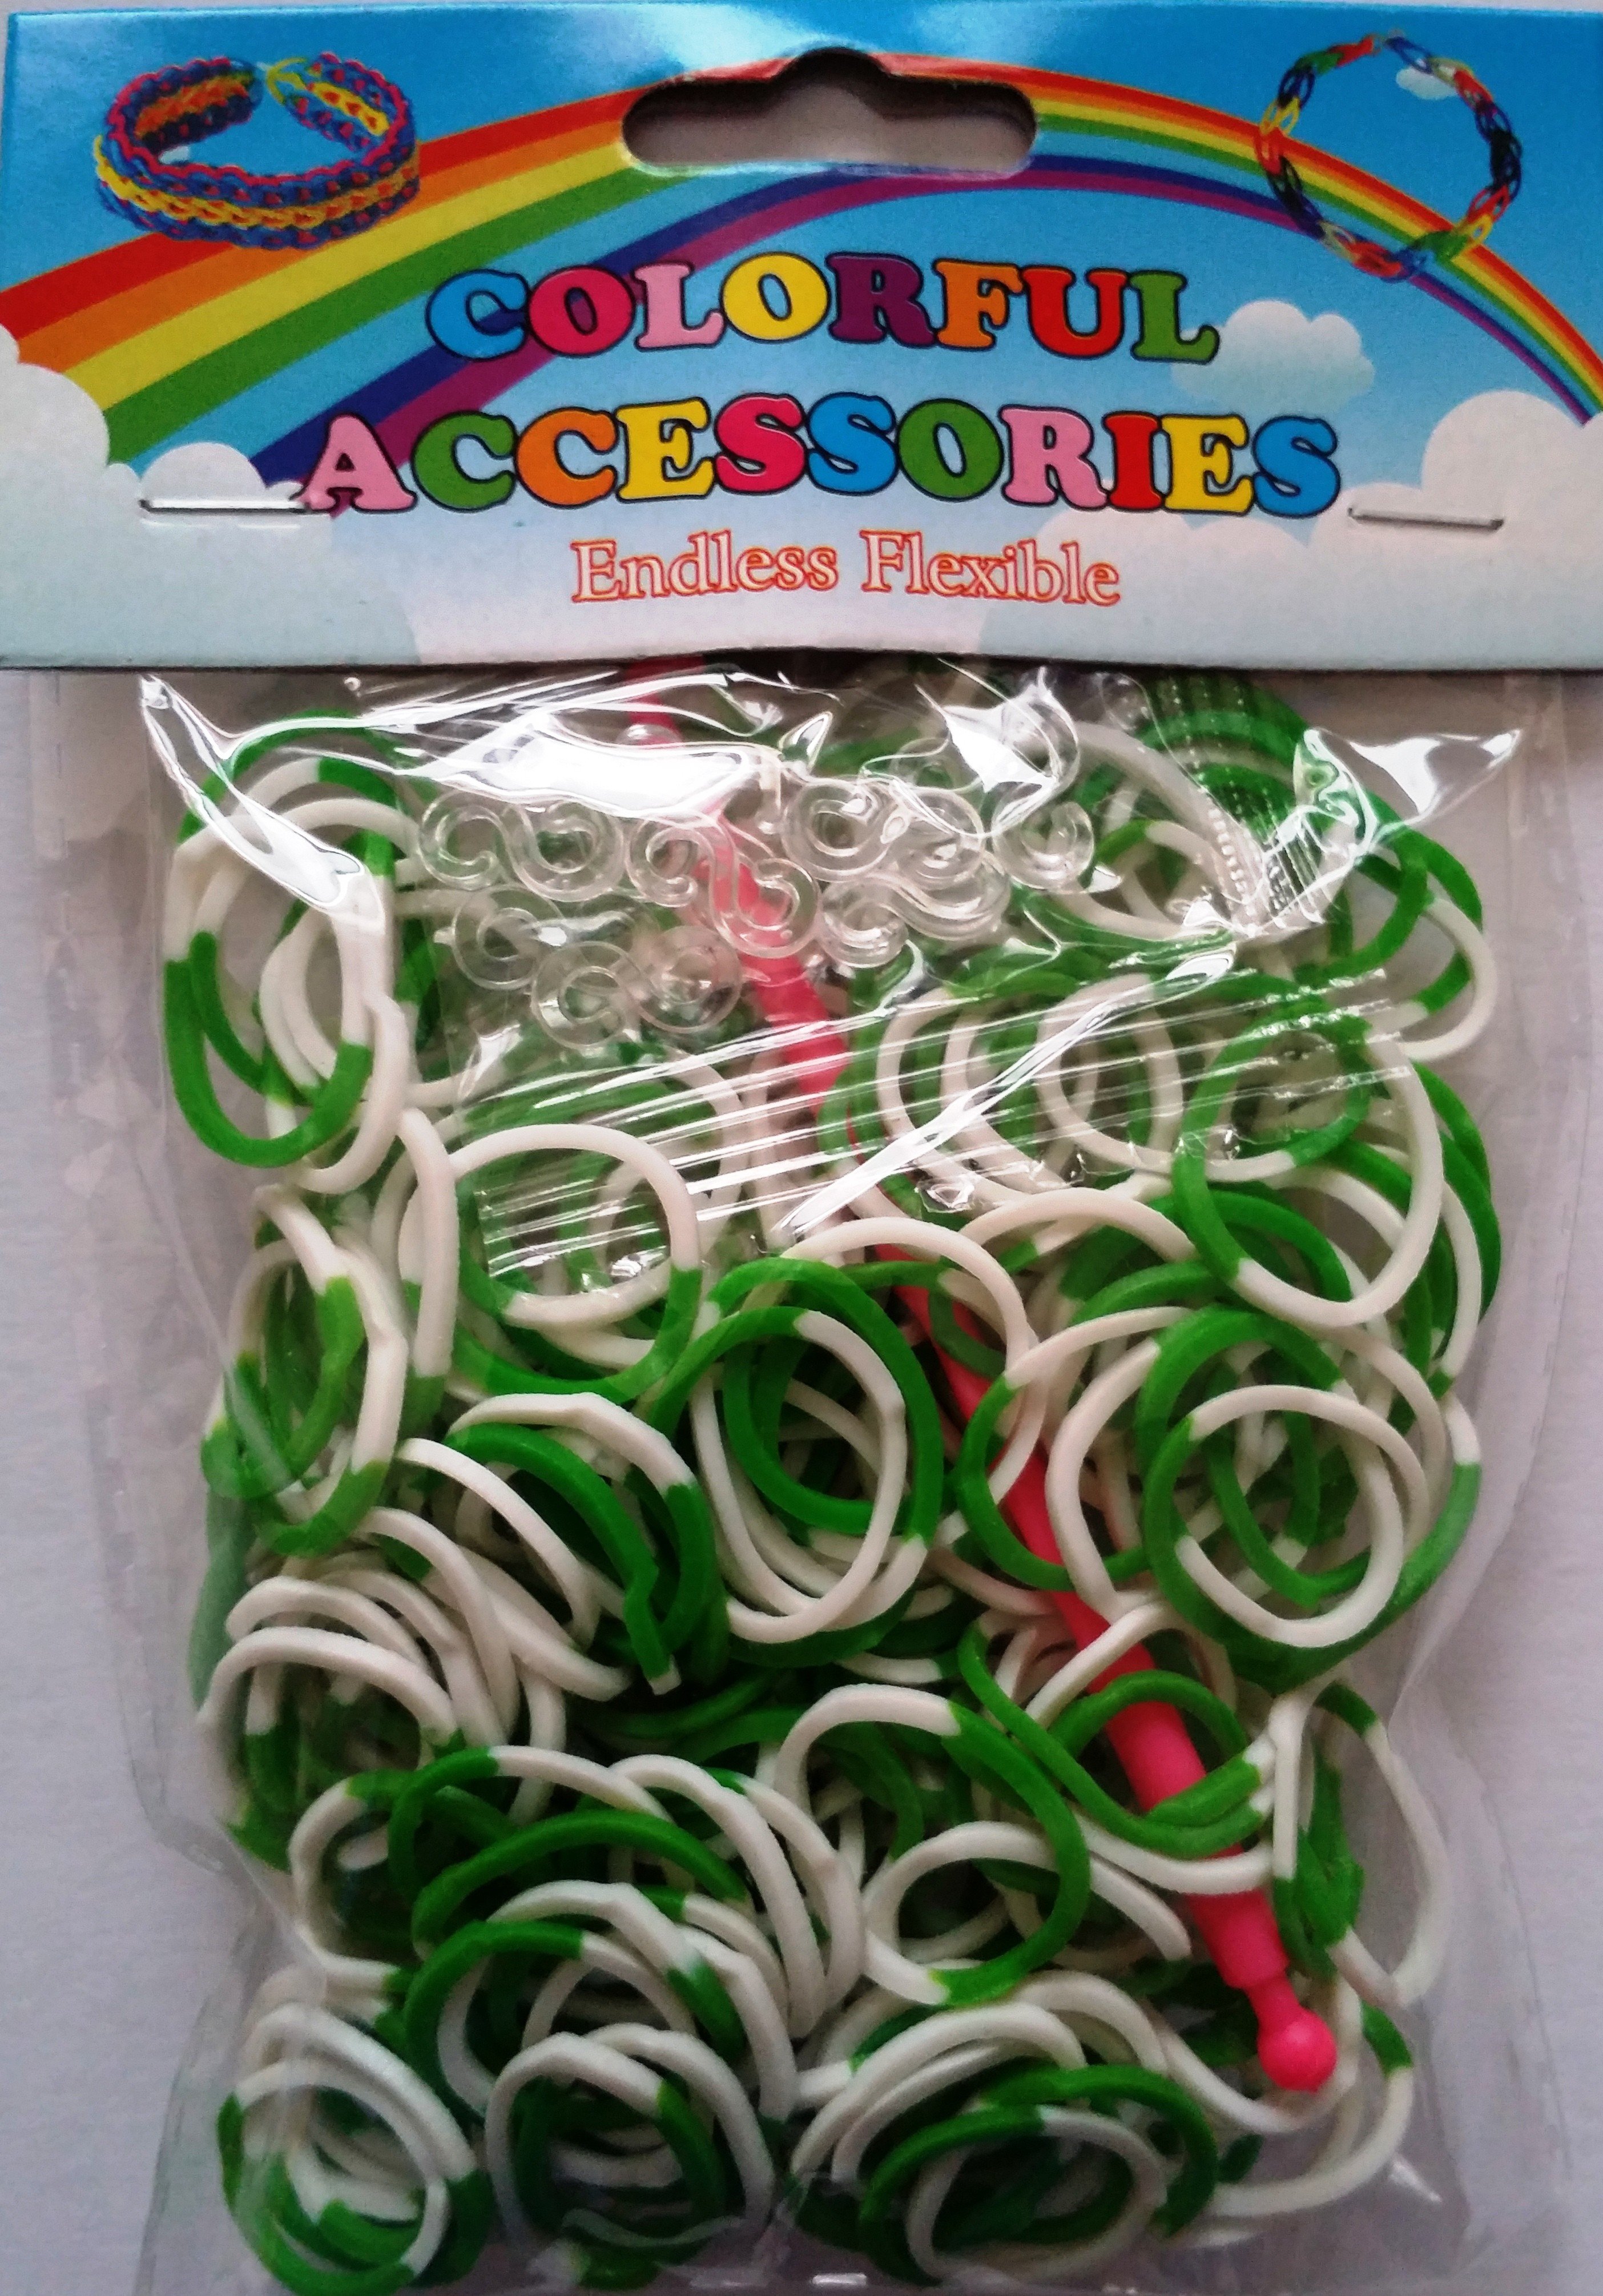 NEW 2 Tone Loom Bands- (Green And White) 300s x 12 Packs